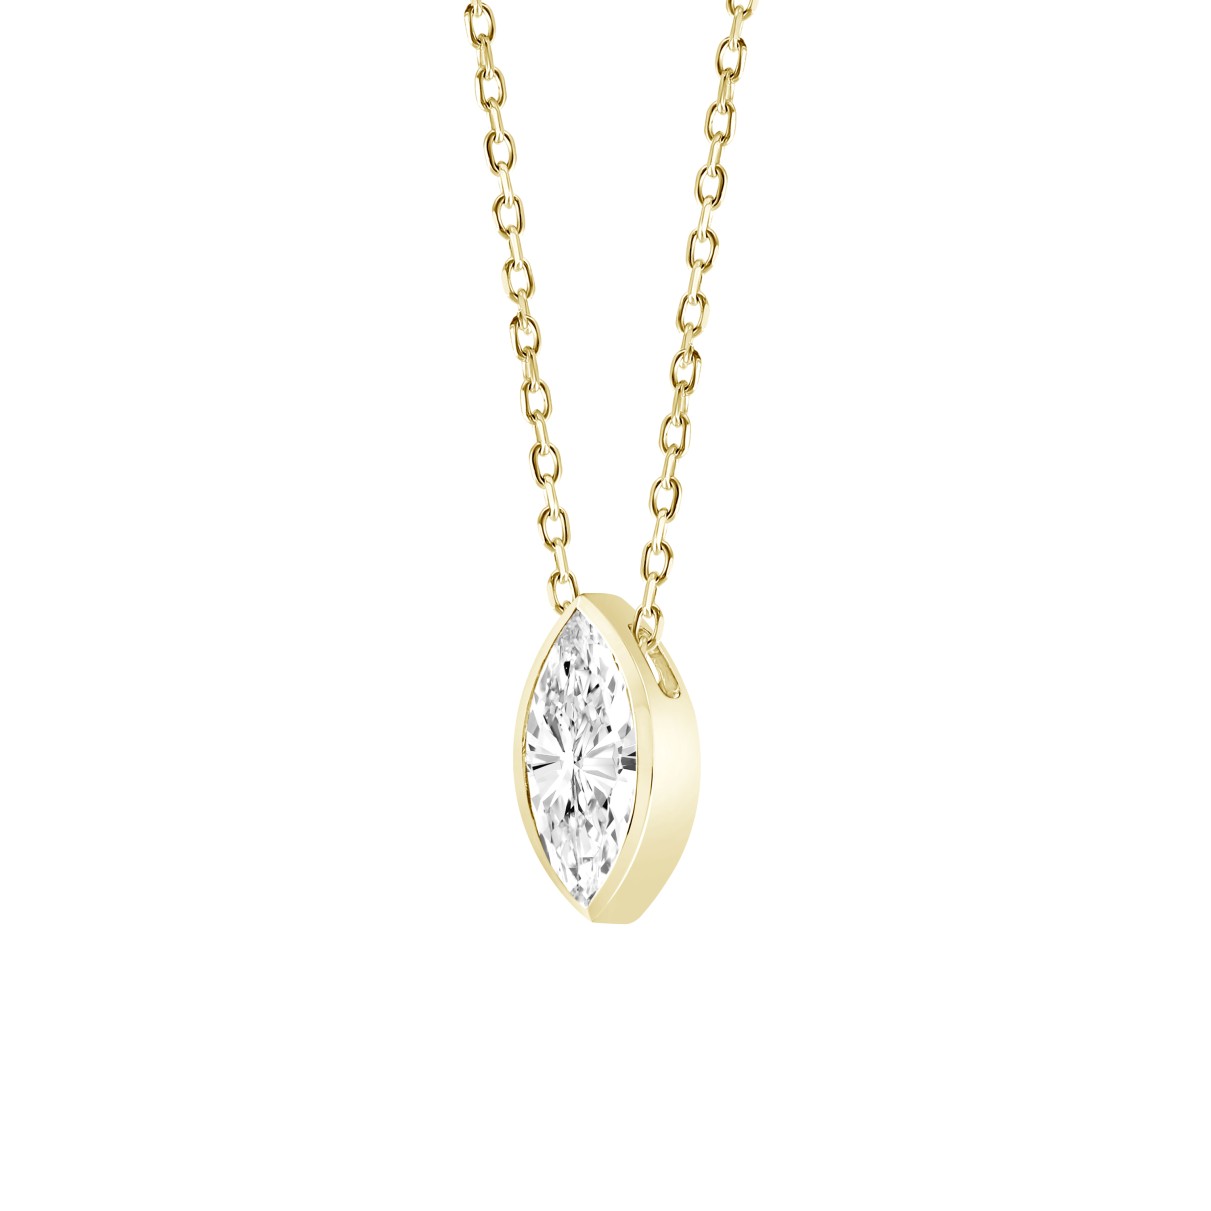 LADIES SOLITAIRE PENDANT 1CT MARQUISE DIAMOND 14K YELLOW GOLD WITH CHAIN